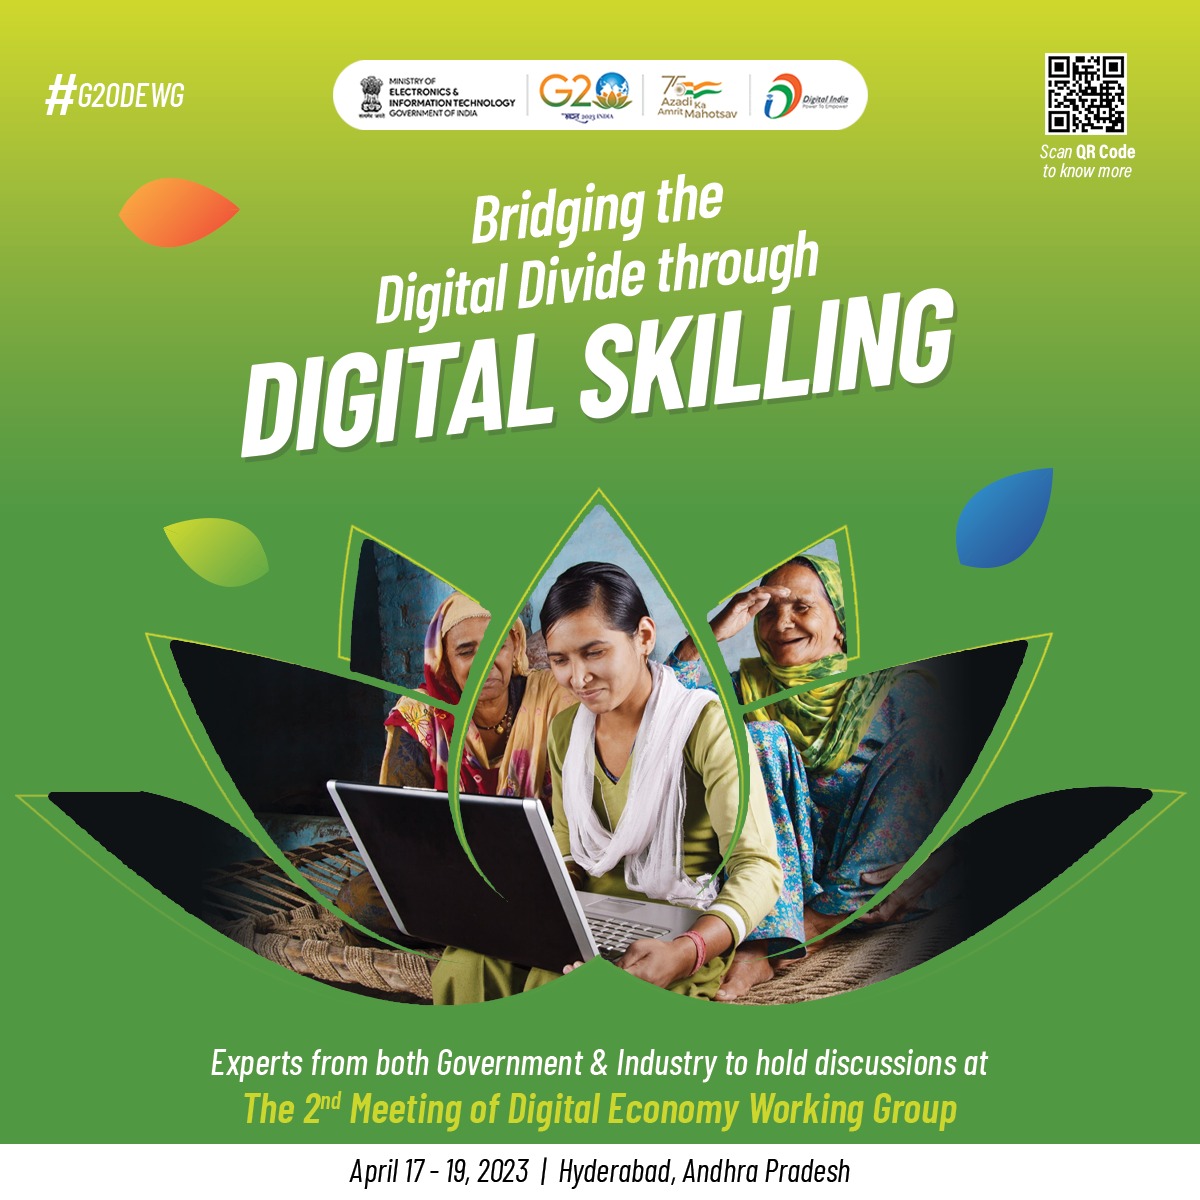 #DigitalSkilling for building a global future-ready workforce is one of the key priority areas of #G20DEWG Group. Deliberations are to take place on the same at the 2nd Meeting of DEWG in Hyderabad (Apr 17-19).